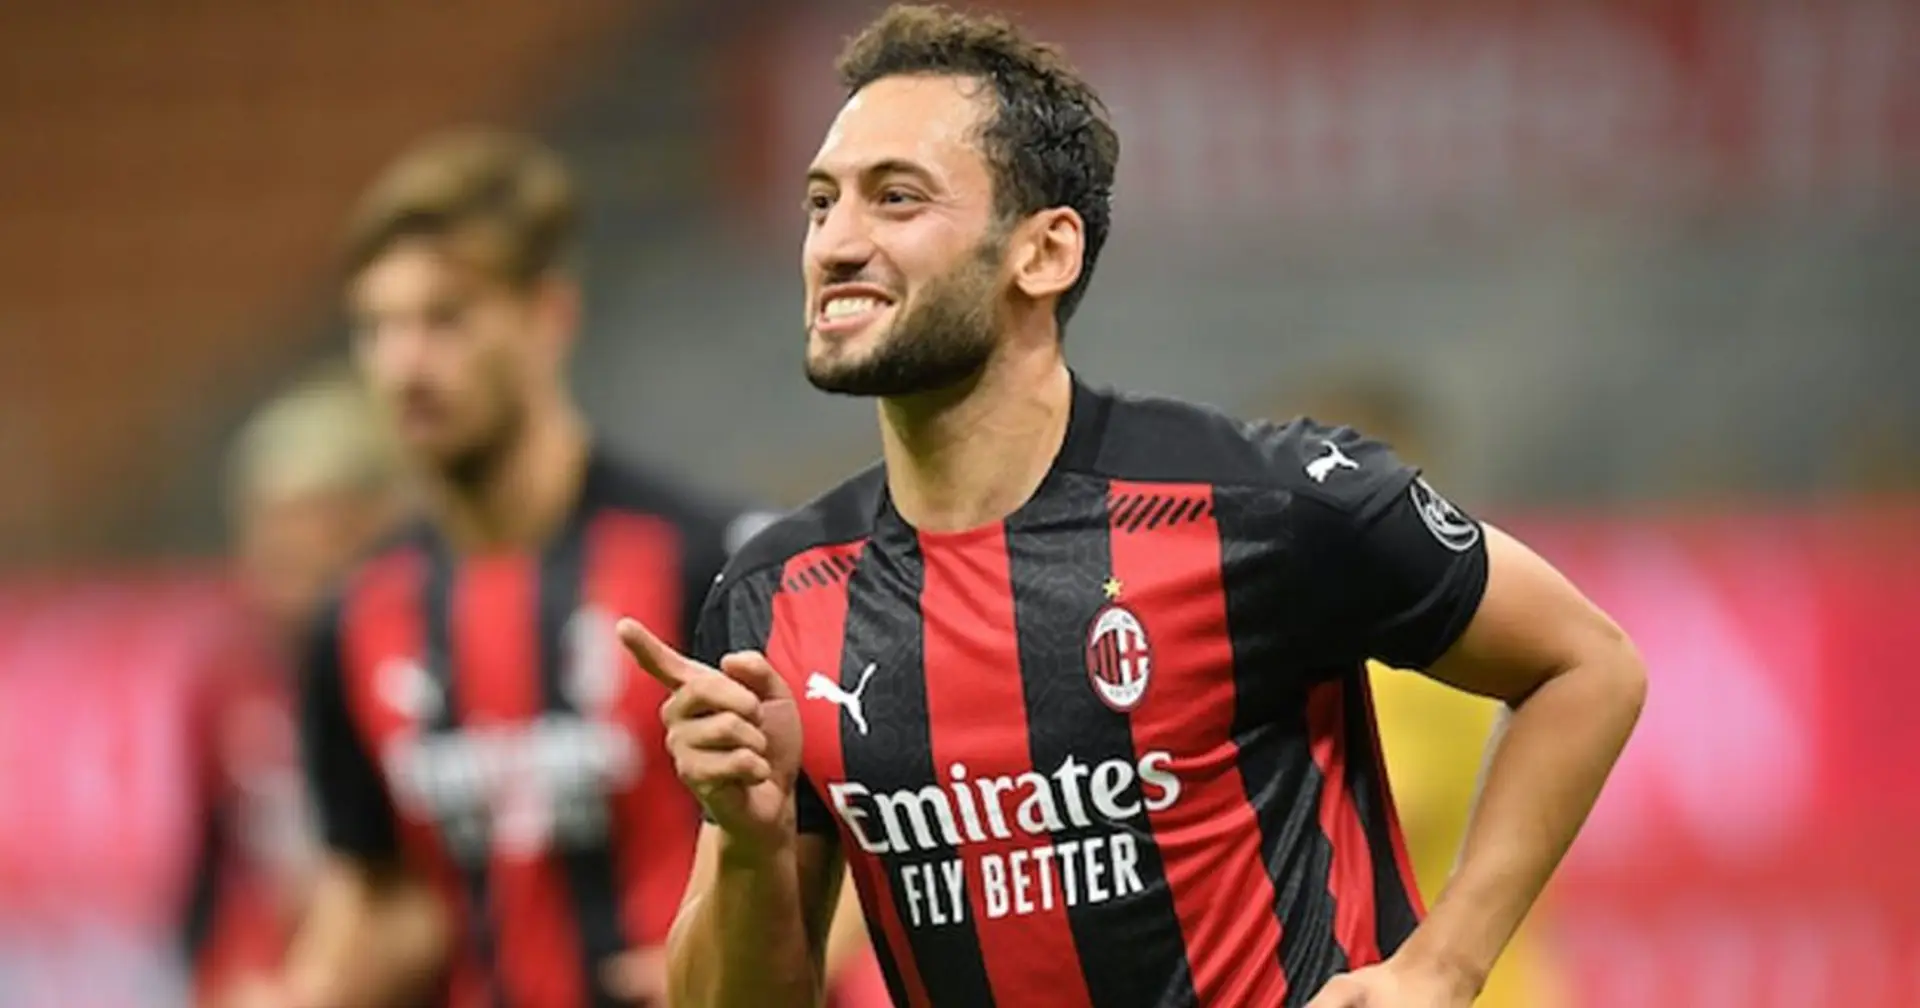 United in talks to sign AC Milan playmaker Hakan Calhanoglu in 2021 (reliability: 4 stars)